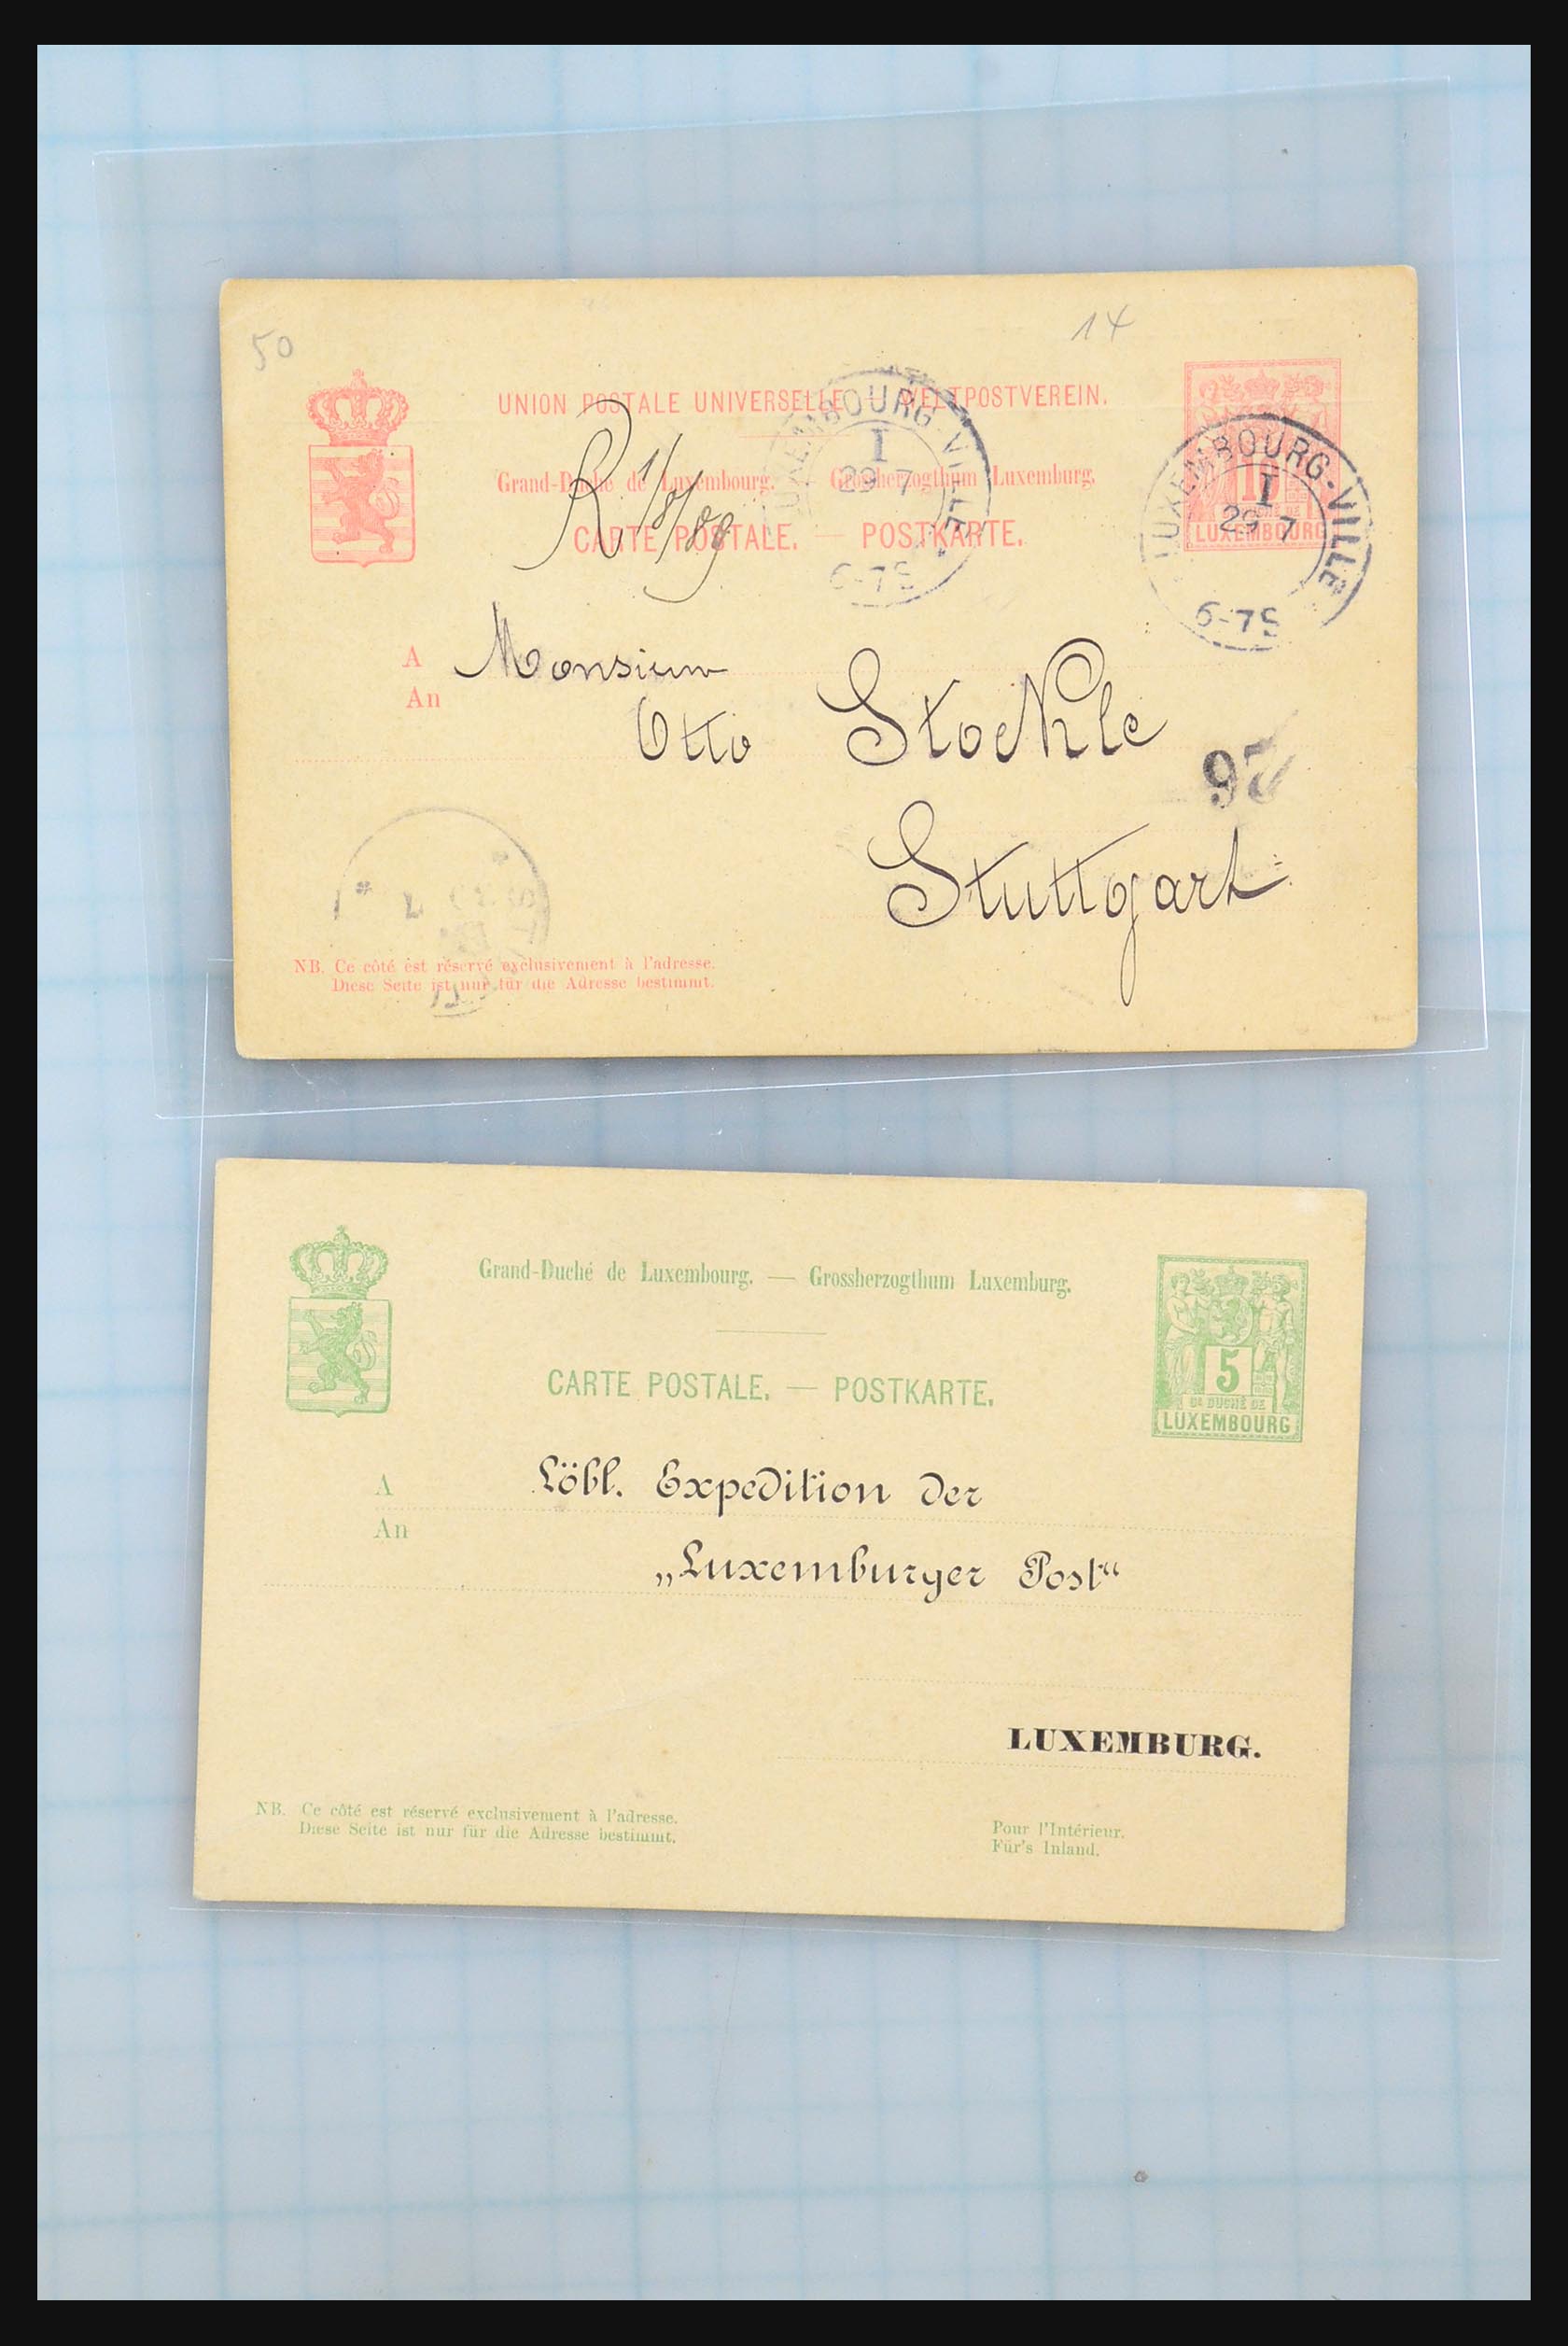 31358 062 - 31358 Portugal/Luxemburg/Greece covers 1880-1960.